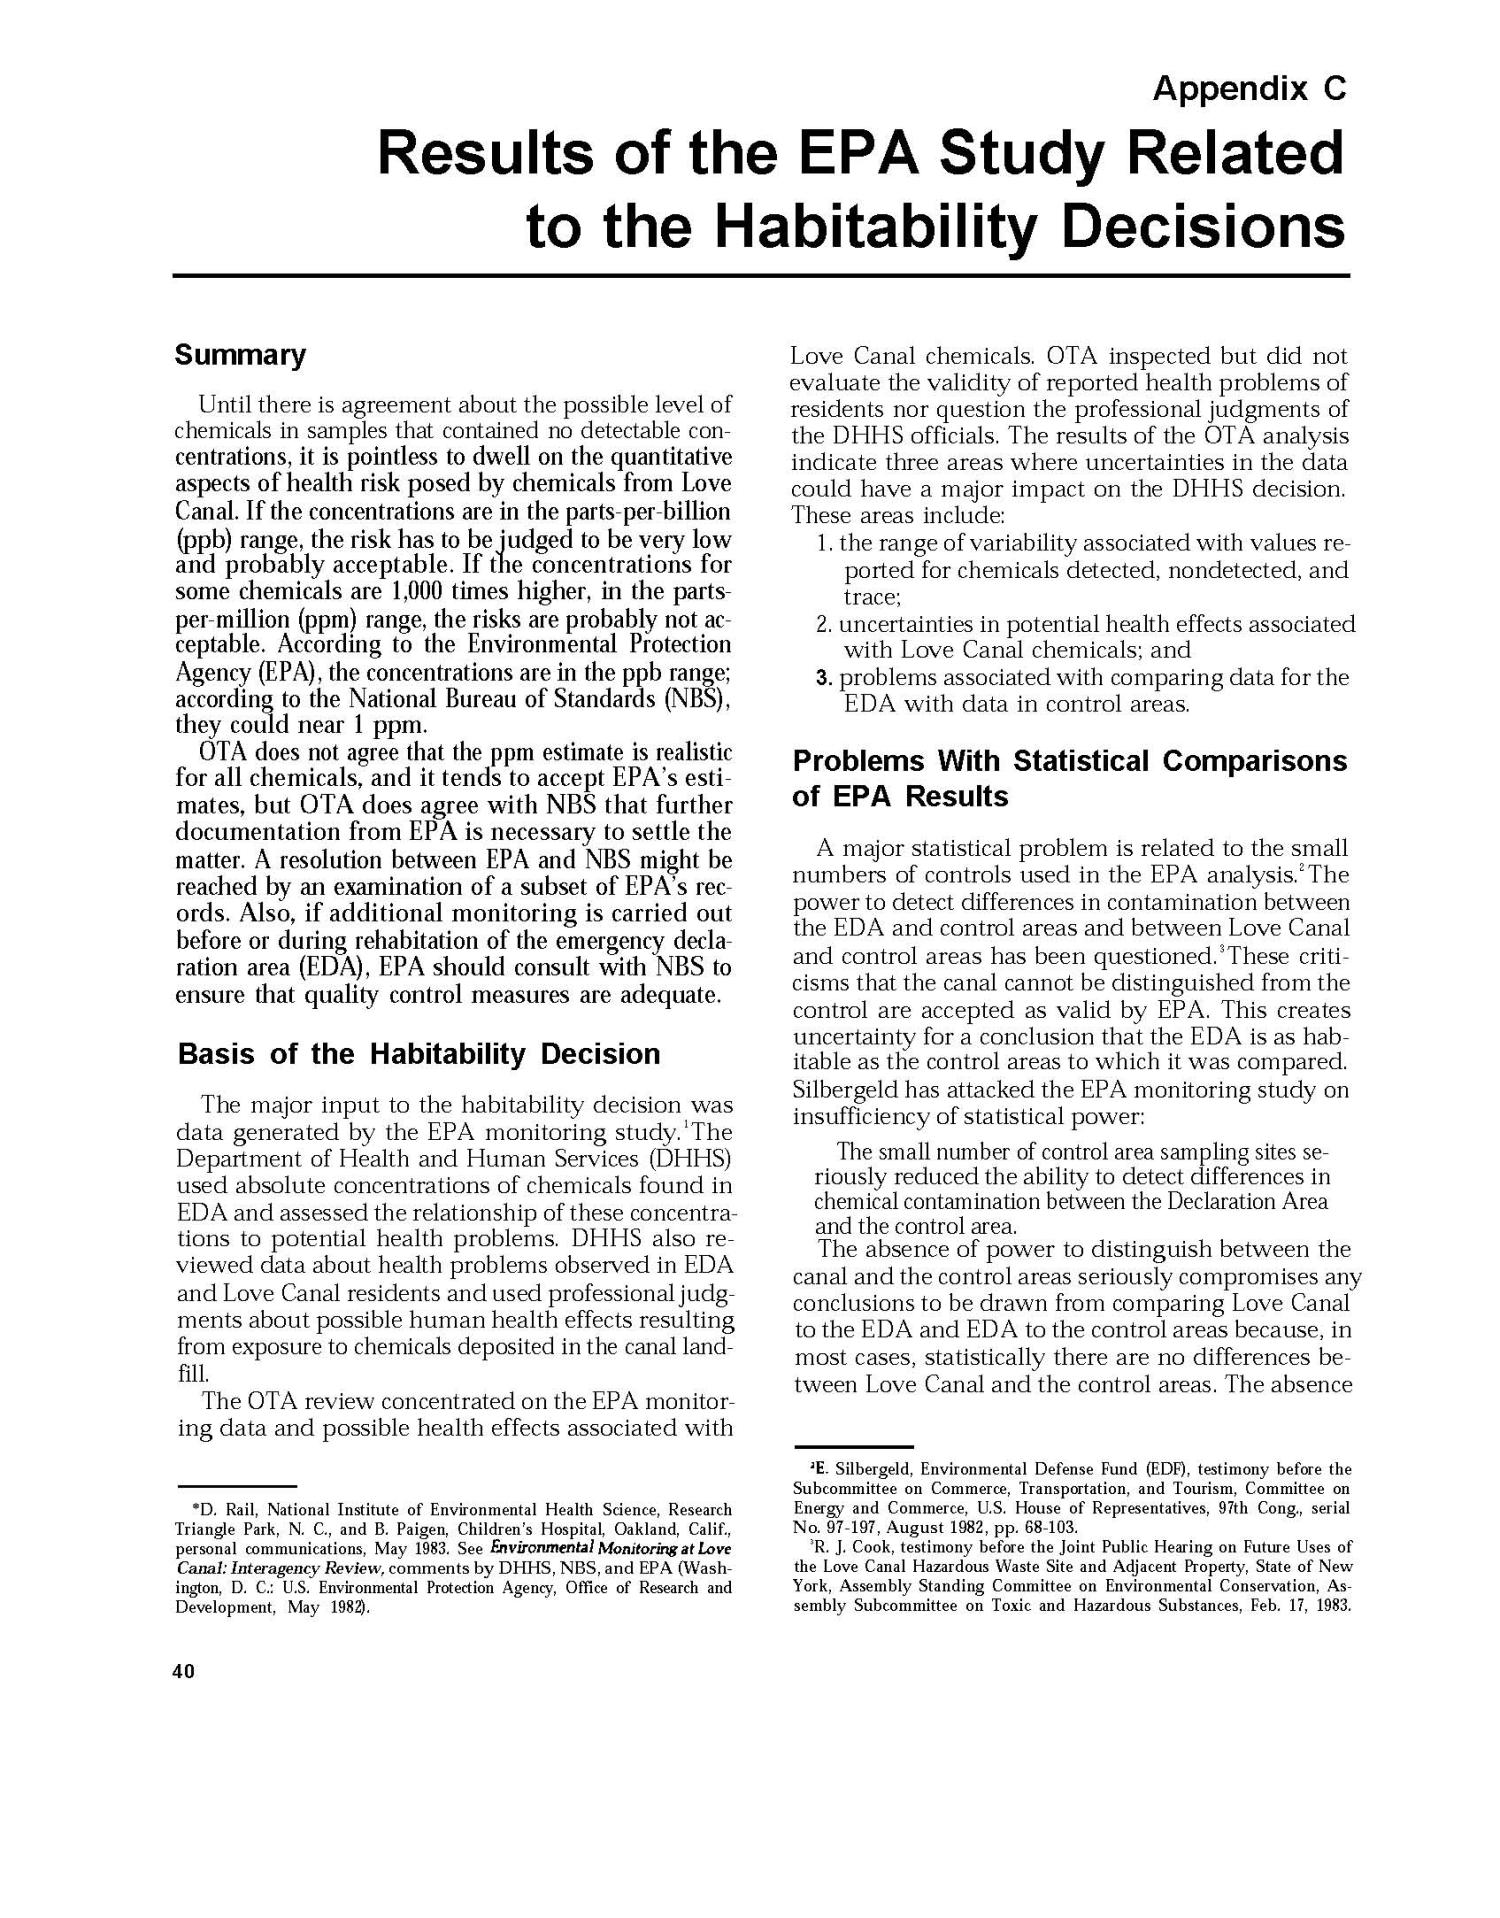 Habitability of the Love Canal Area: An Analysis of the Technical Basis for the Decision of the Habitability of the Emergency Declaration Area: A Technical Memorandum
                                                
                                                    40
                                                